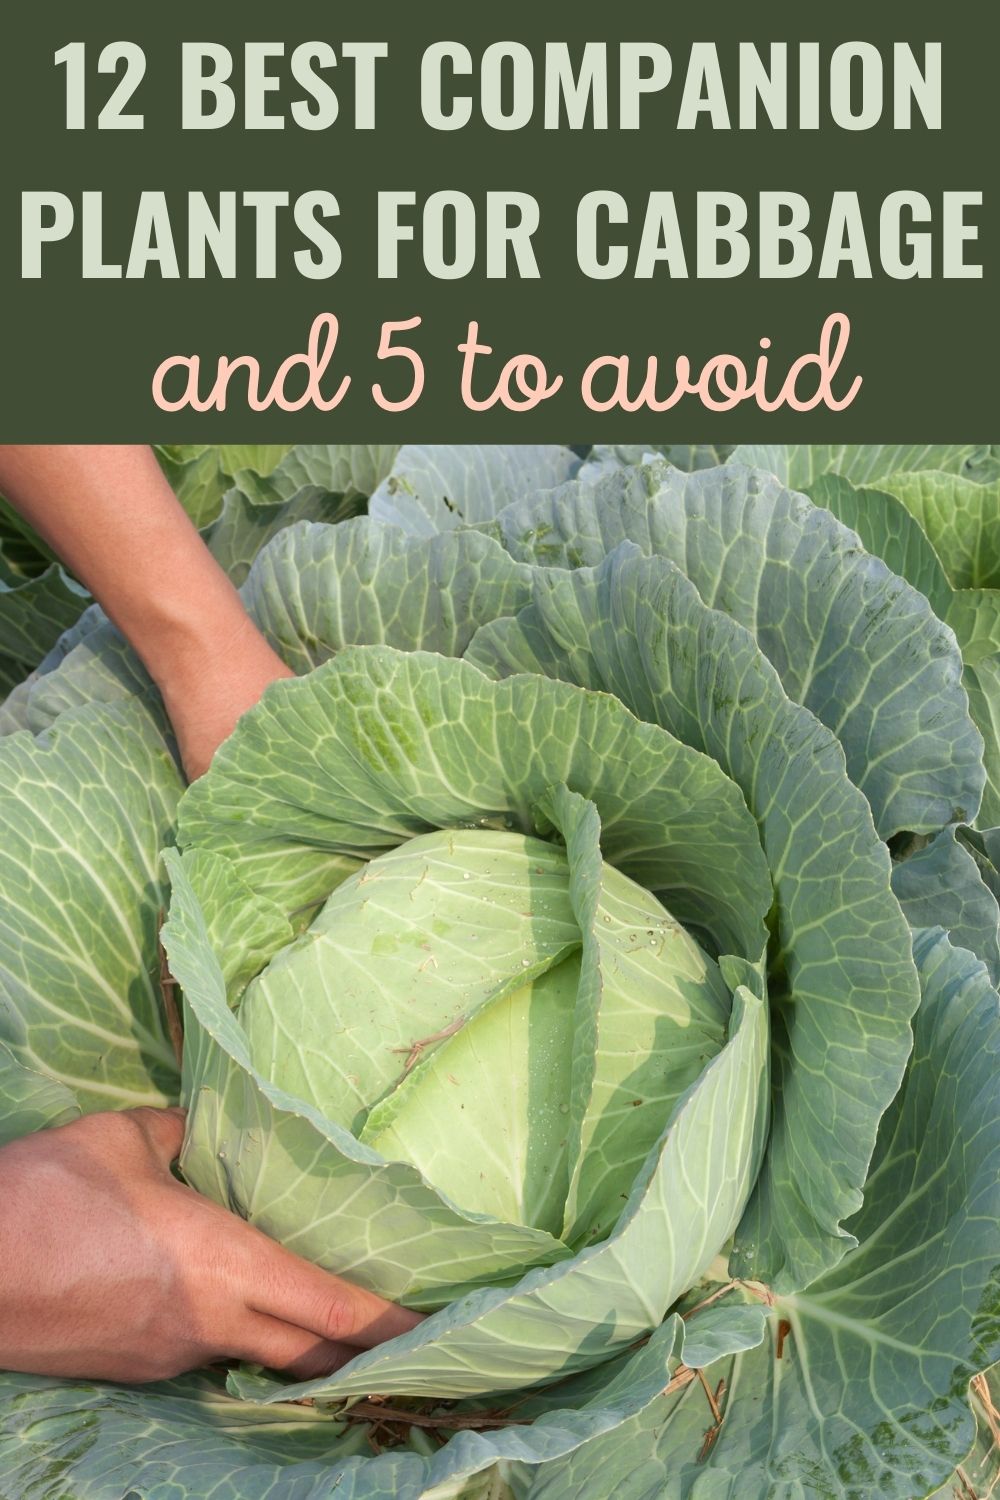 12 Best Companion Plants for Cabbage, And 5 to Avoid